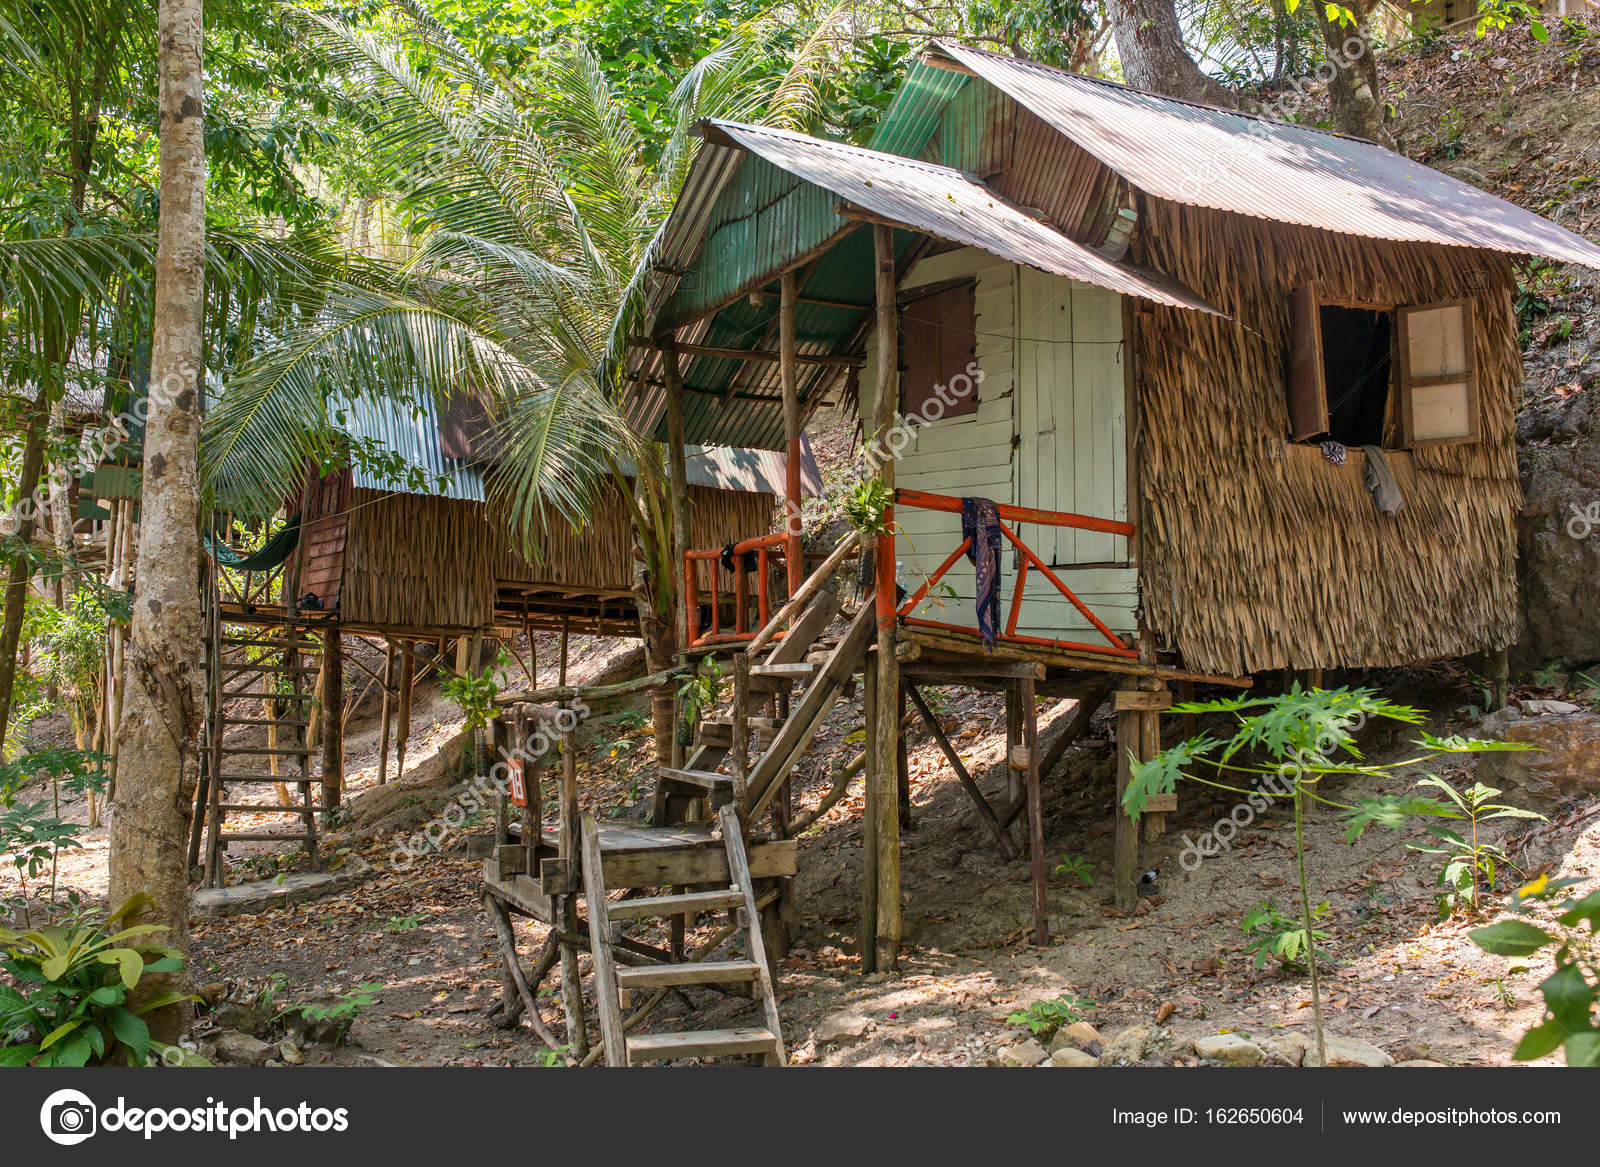  Bamboo  hut  on Koh Chang island in Thailand  Stock Photo 